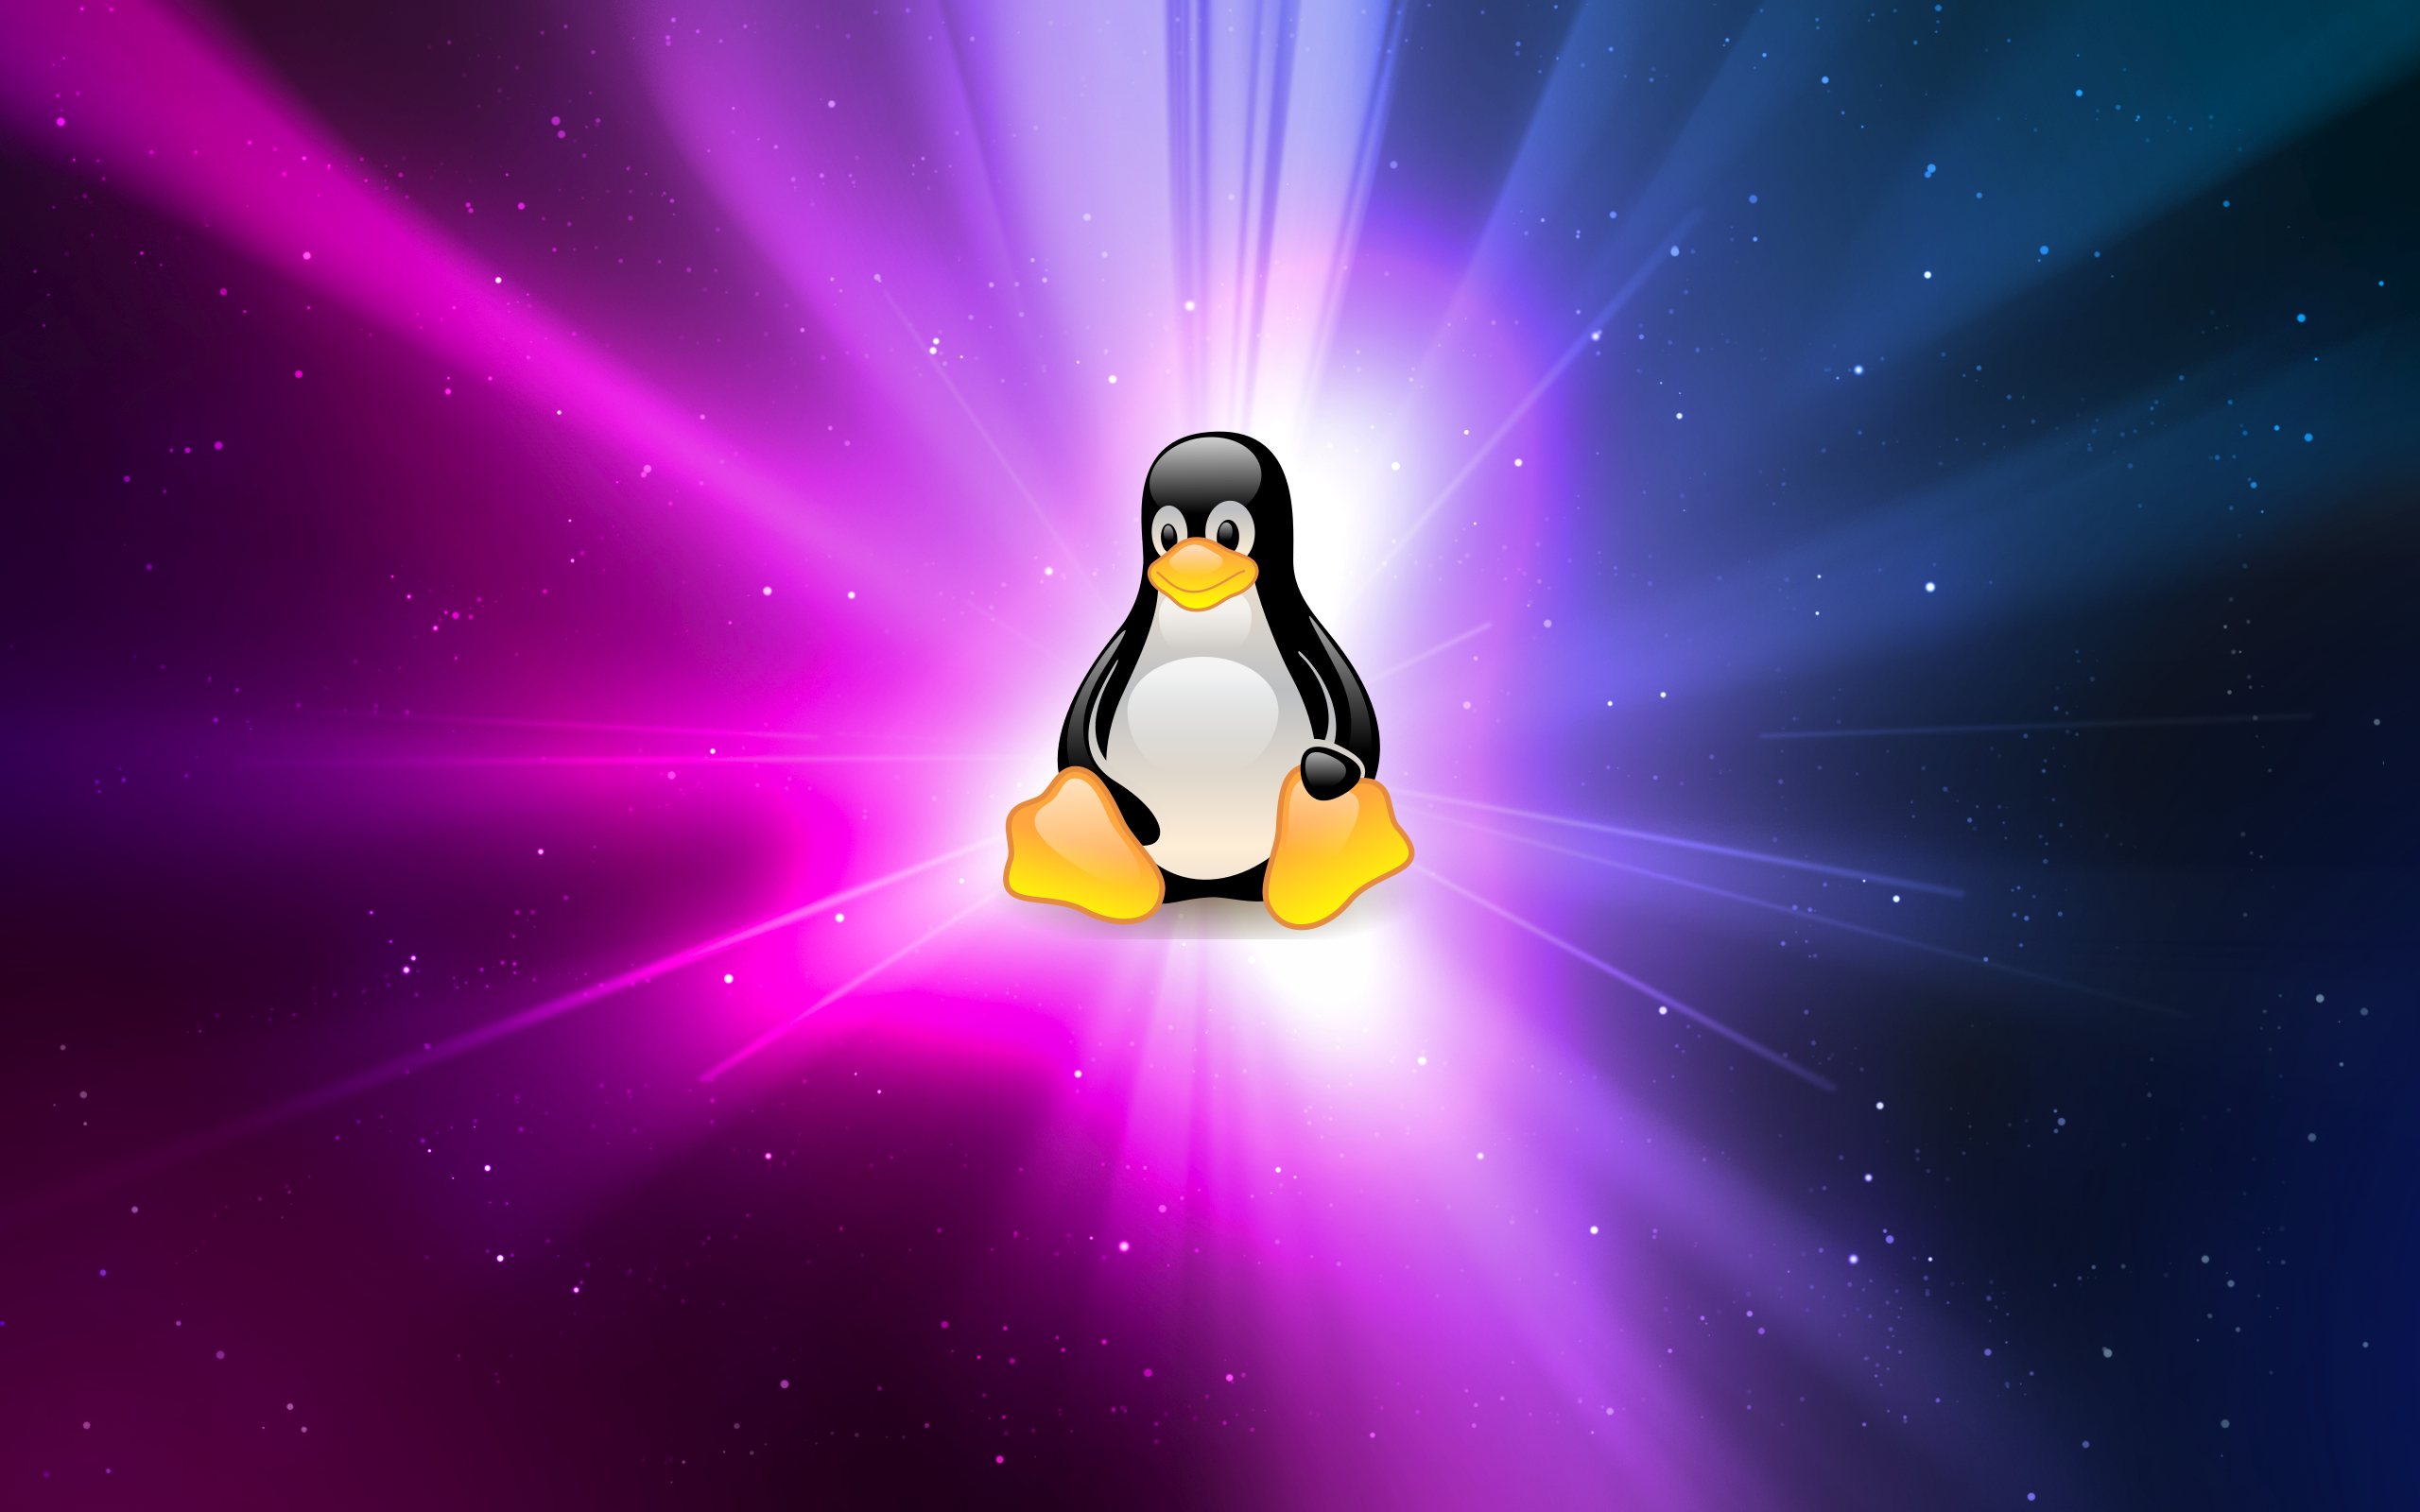 Free Download Linux Wallpapers 13 2560x1600 For Your Desktop Mobile Tablet Explore 49 Linux Wallpaper Download Linux Mint Wallpaper Arch Linux Wallpaper Cool Wallpapers